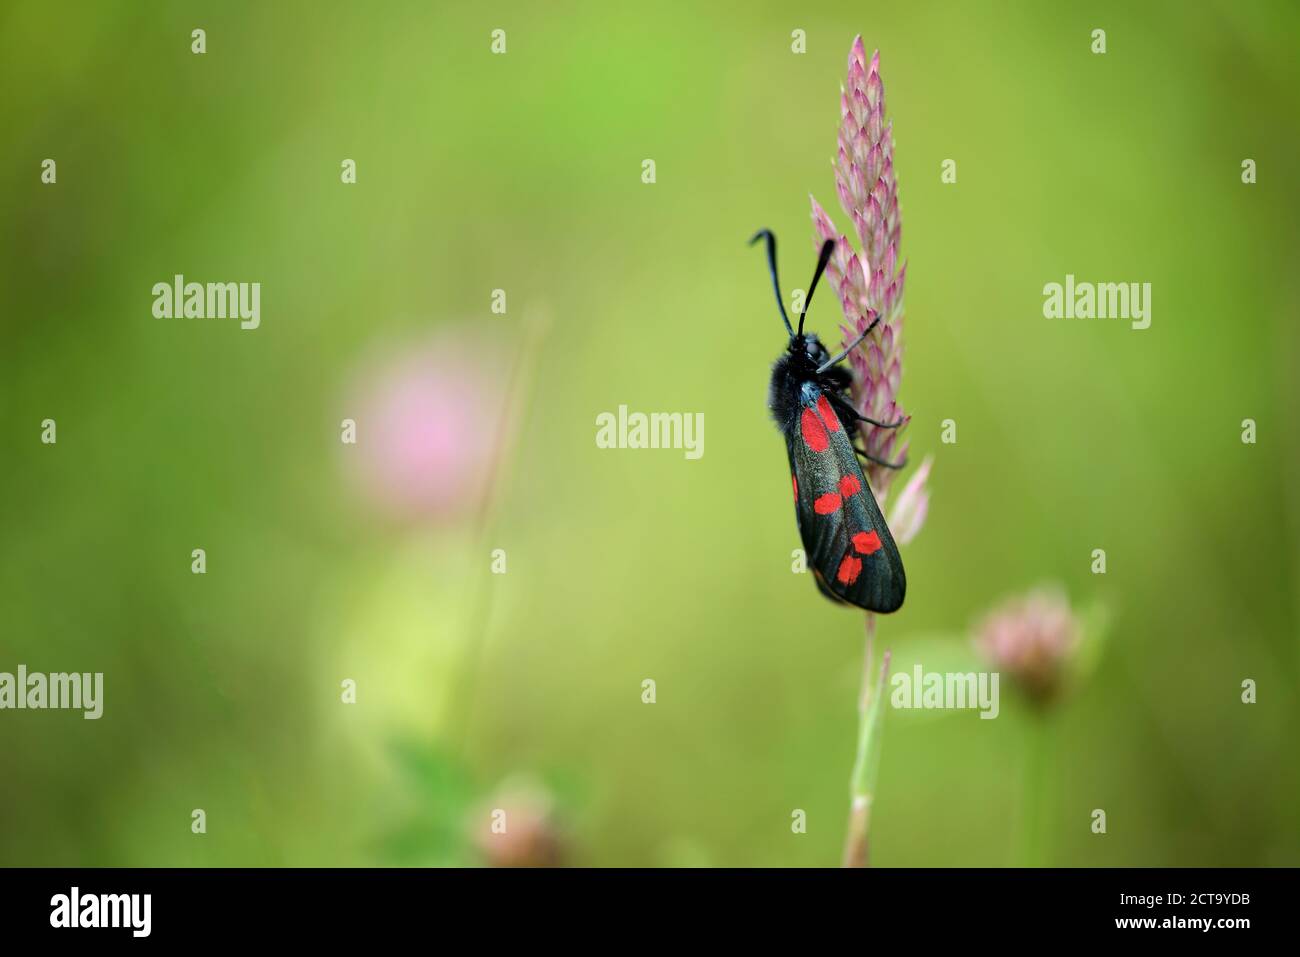 Six-spot Burnet, Zygaena filipendulae, hanging on blade of grass in front of green background Stock Photo